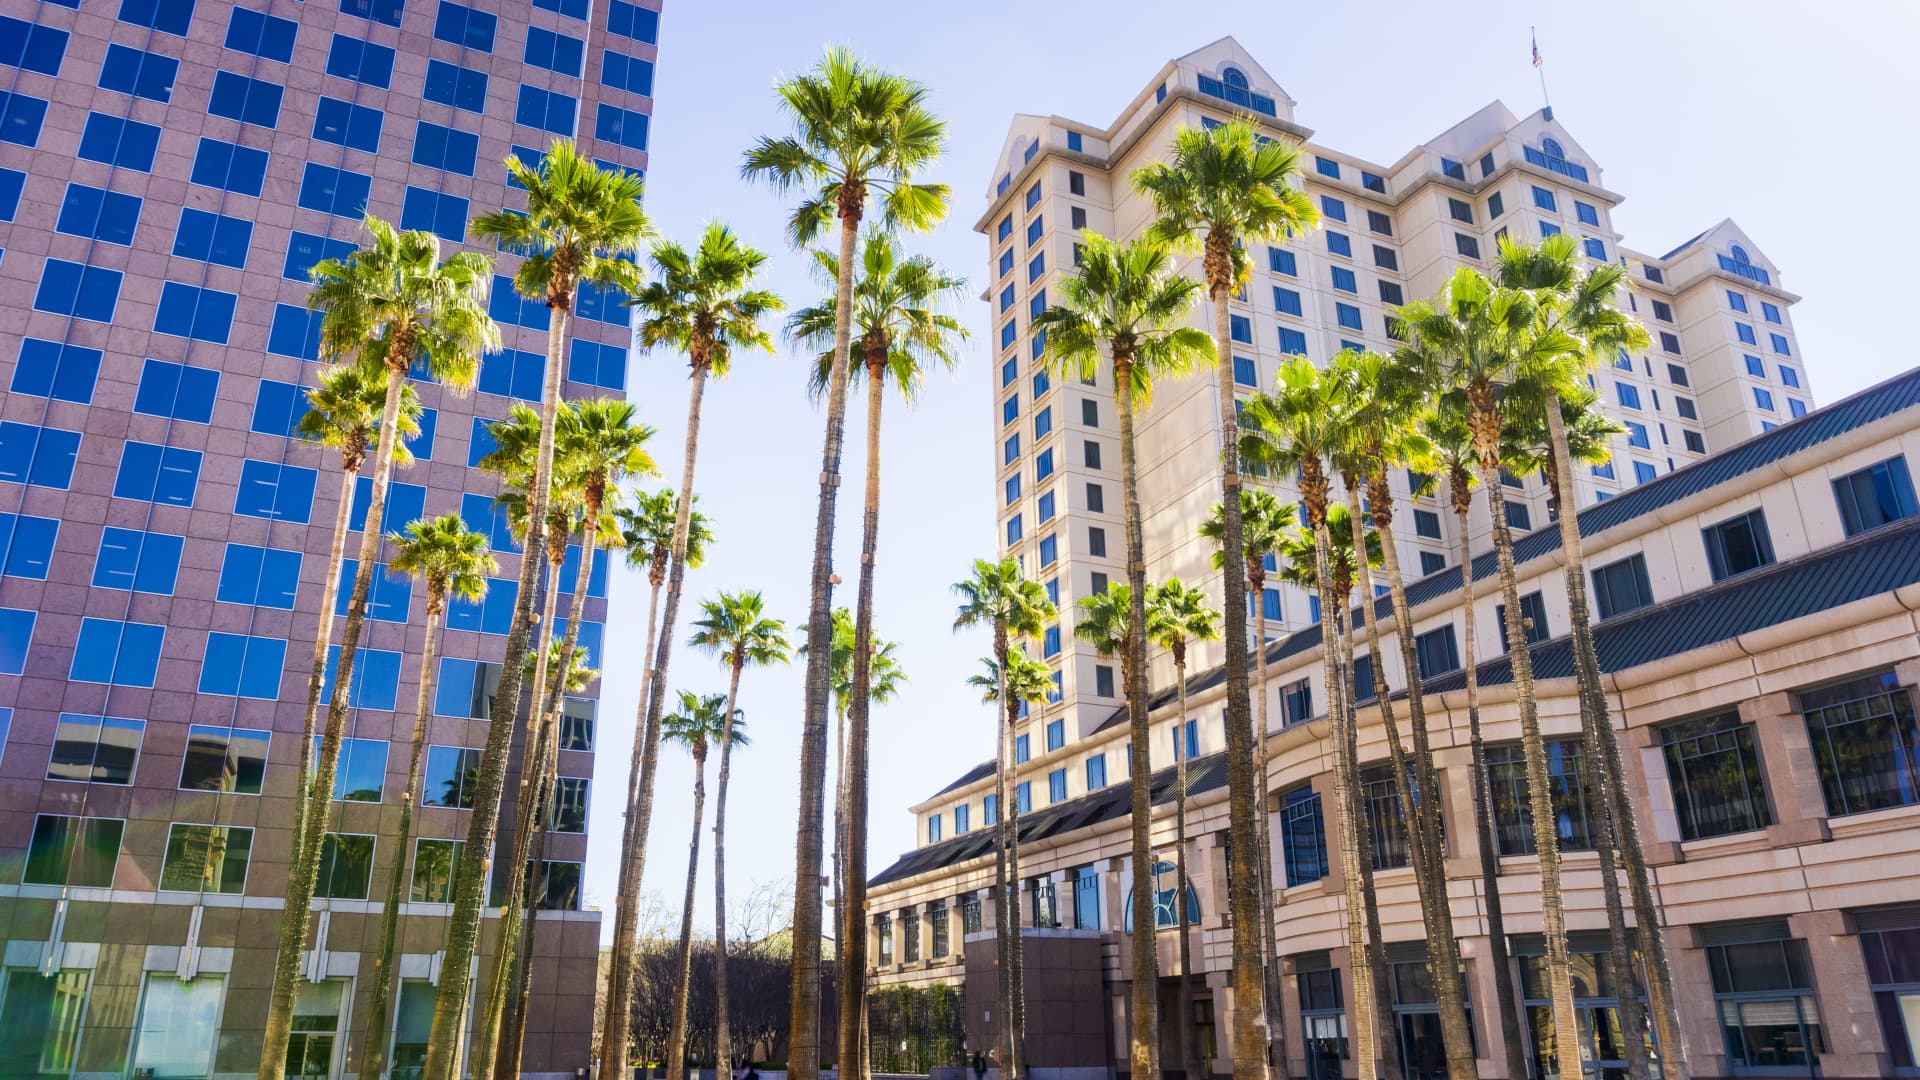 This California city is the most popular with millennial homebuyers in the U.S.